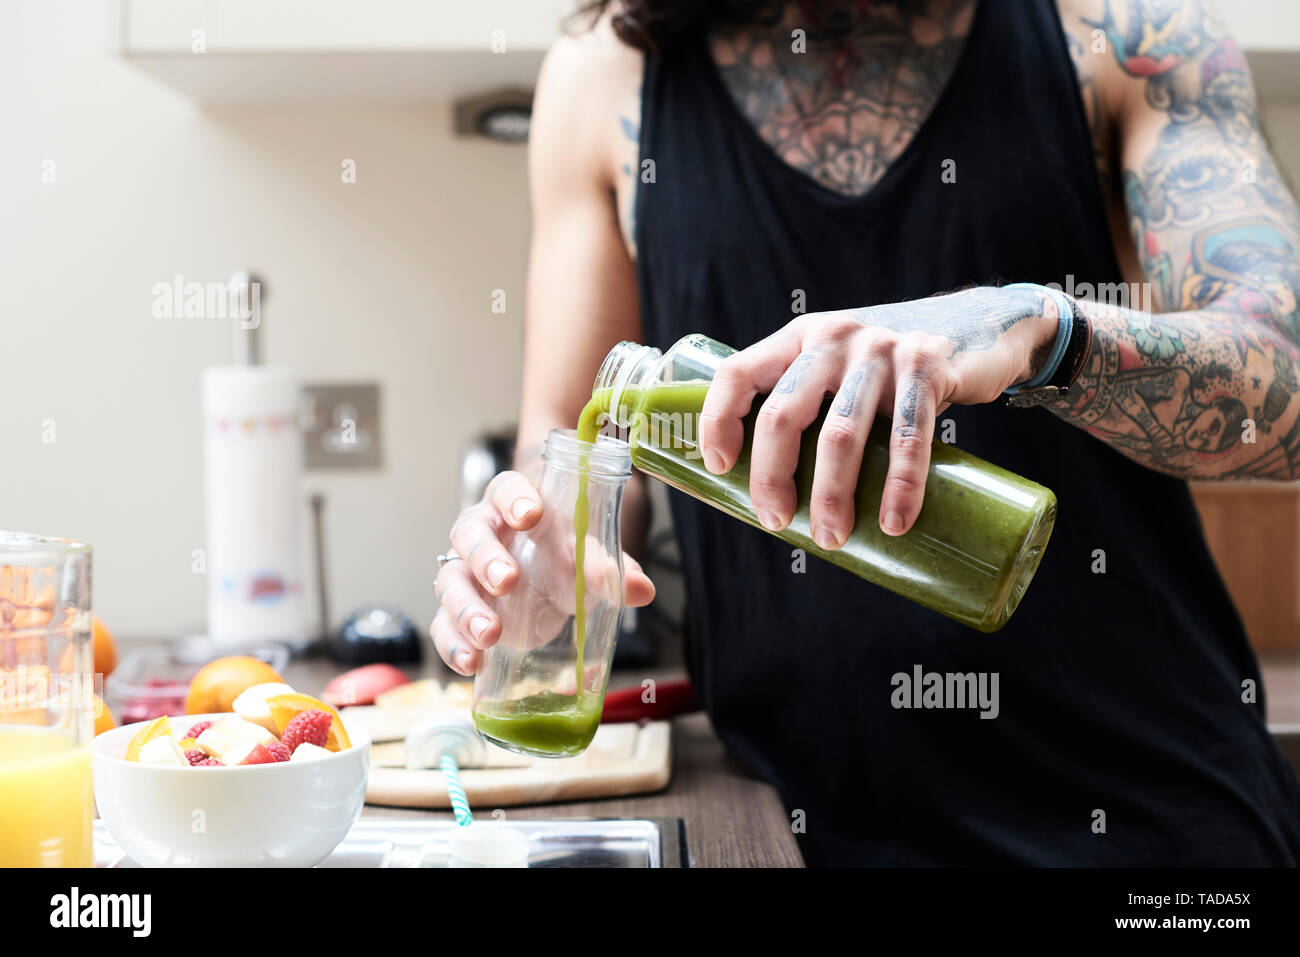 Tattooed young man pouring in healthy smoothie in kitchen Stock Photo